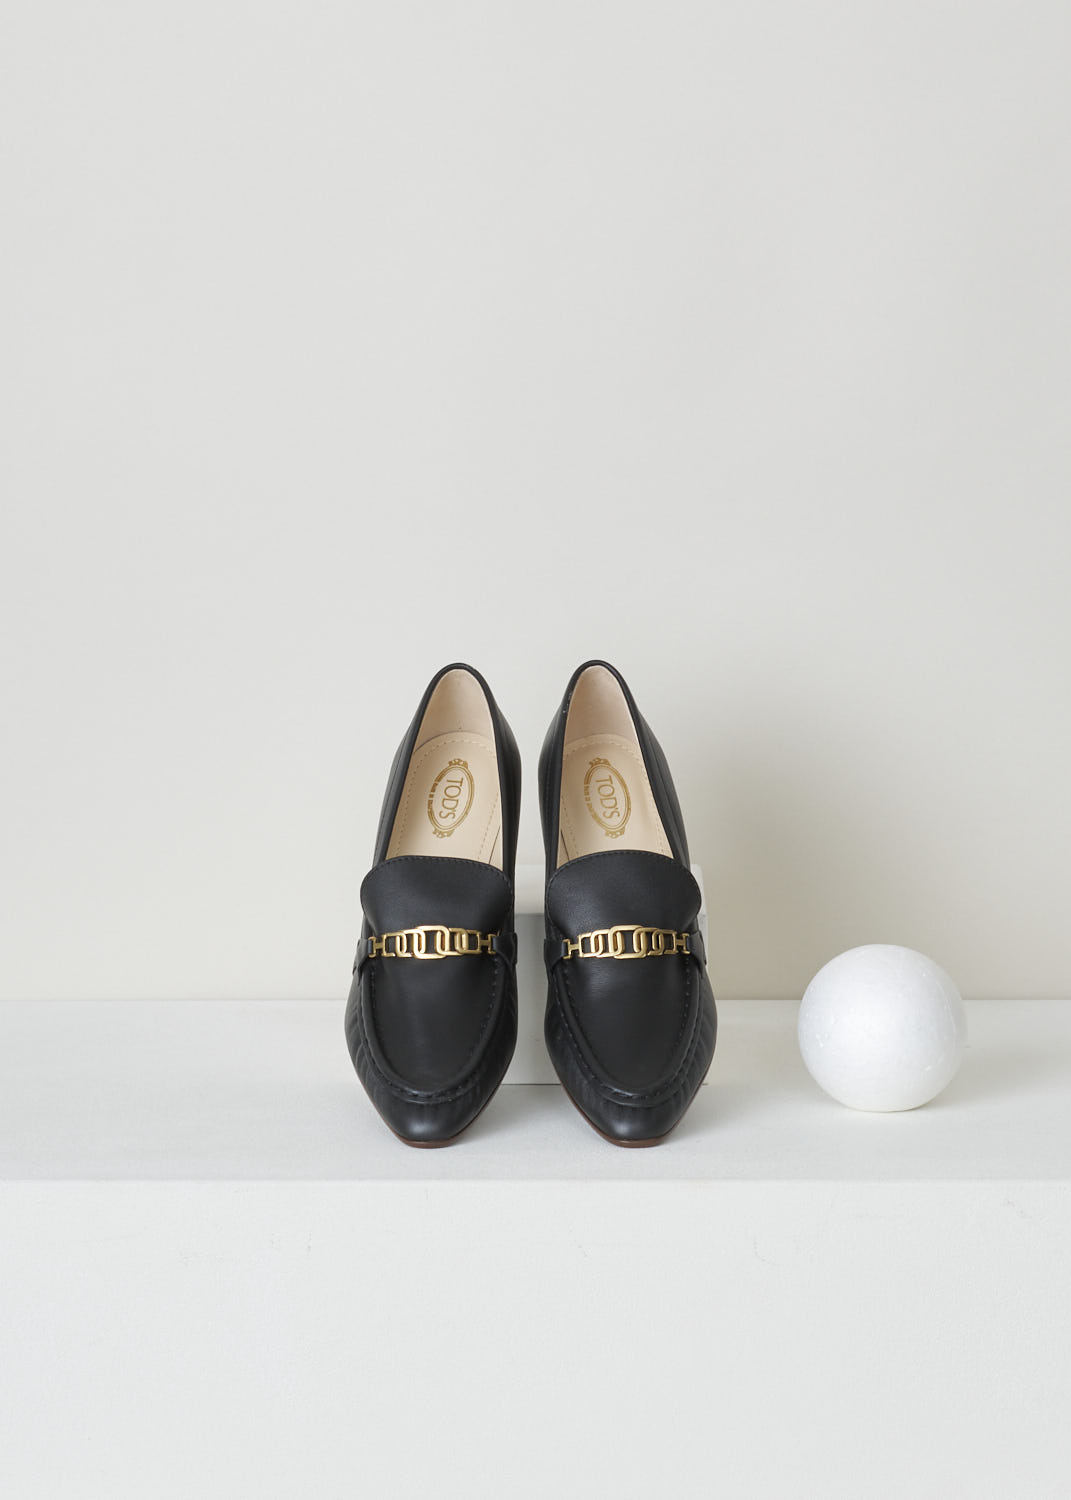 TODS, BLACK LEATHER LOAFERS WITH A TRAPEZOID HEEL, XXW09D0EC80_MID_B999_NERO, Black, Top, Black leather loafers with a wooden trapezoid heel. This model has a pointed toe and a gold-toned buckle decorating the front. Around the trim, subtle pleats can be found.


Heel height: 6 cm / 2.3 inch.